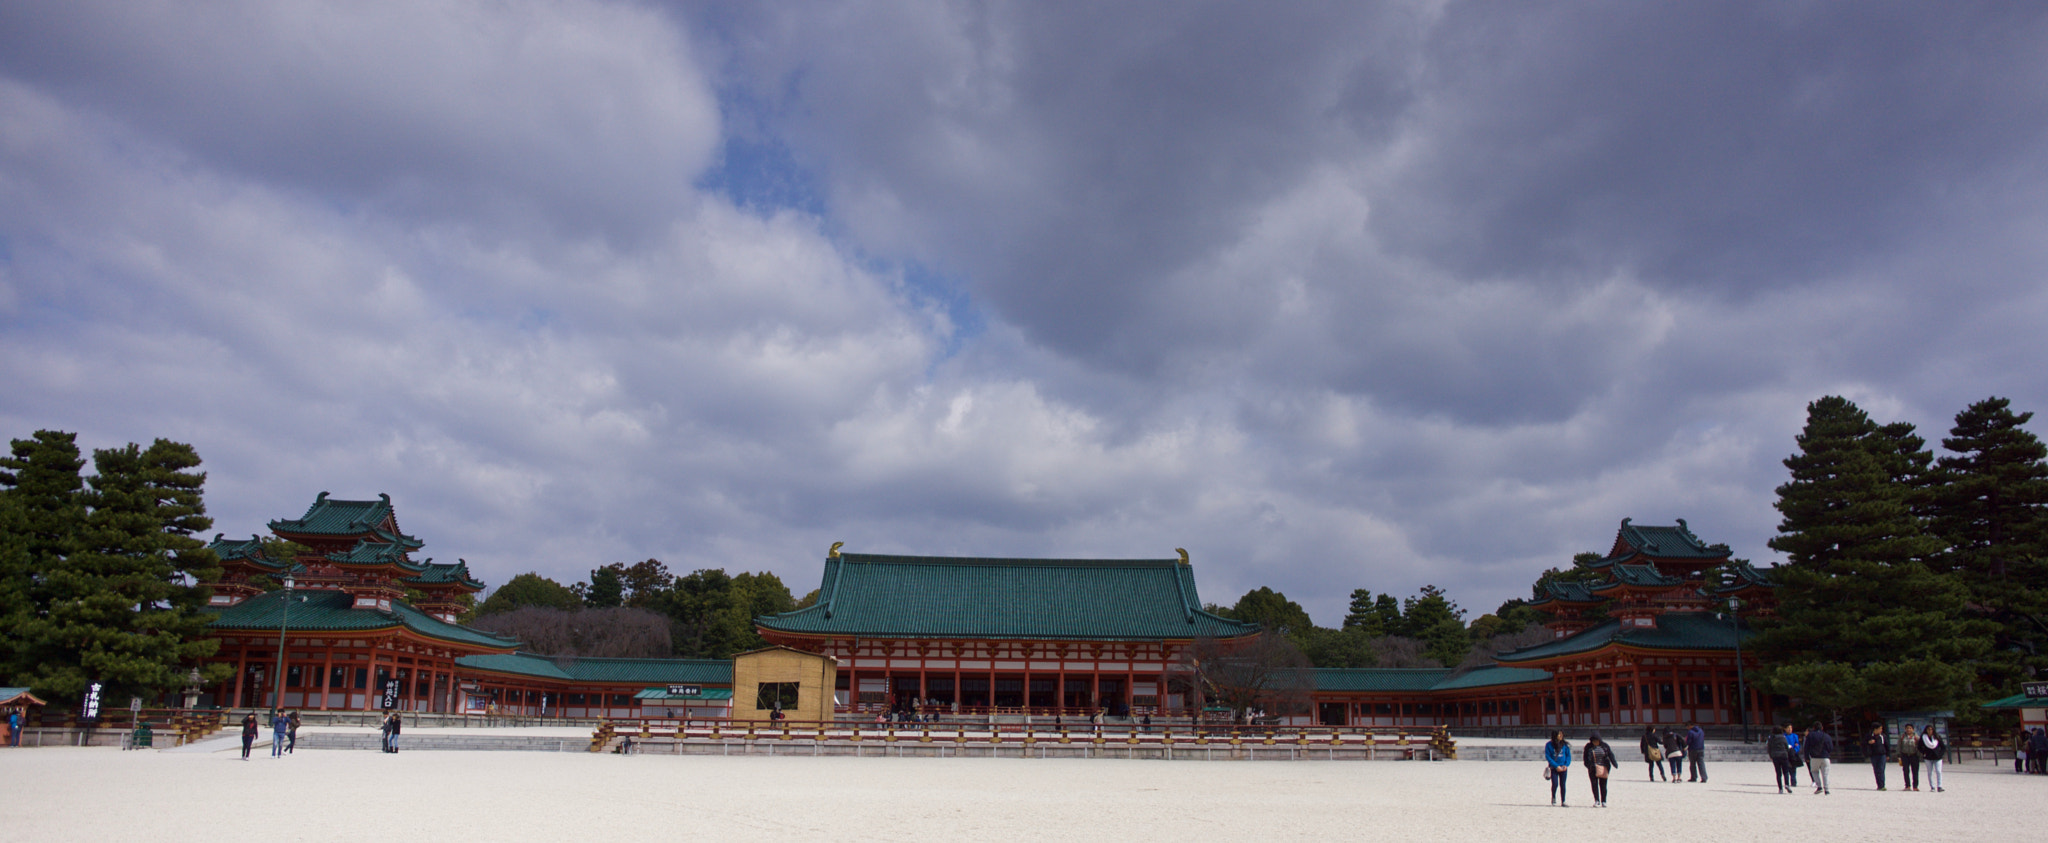 Sony Alpha NEX-7 + ZEISS Touit 12mm F2.8 sample photo. Temple in kyoto photography